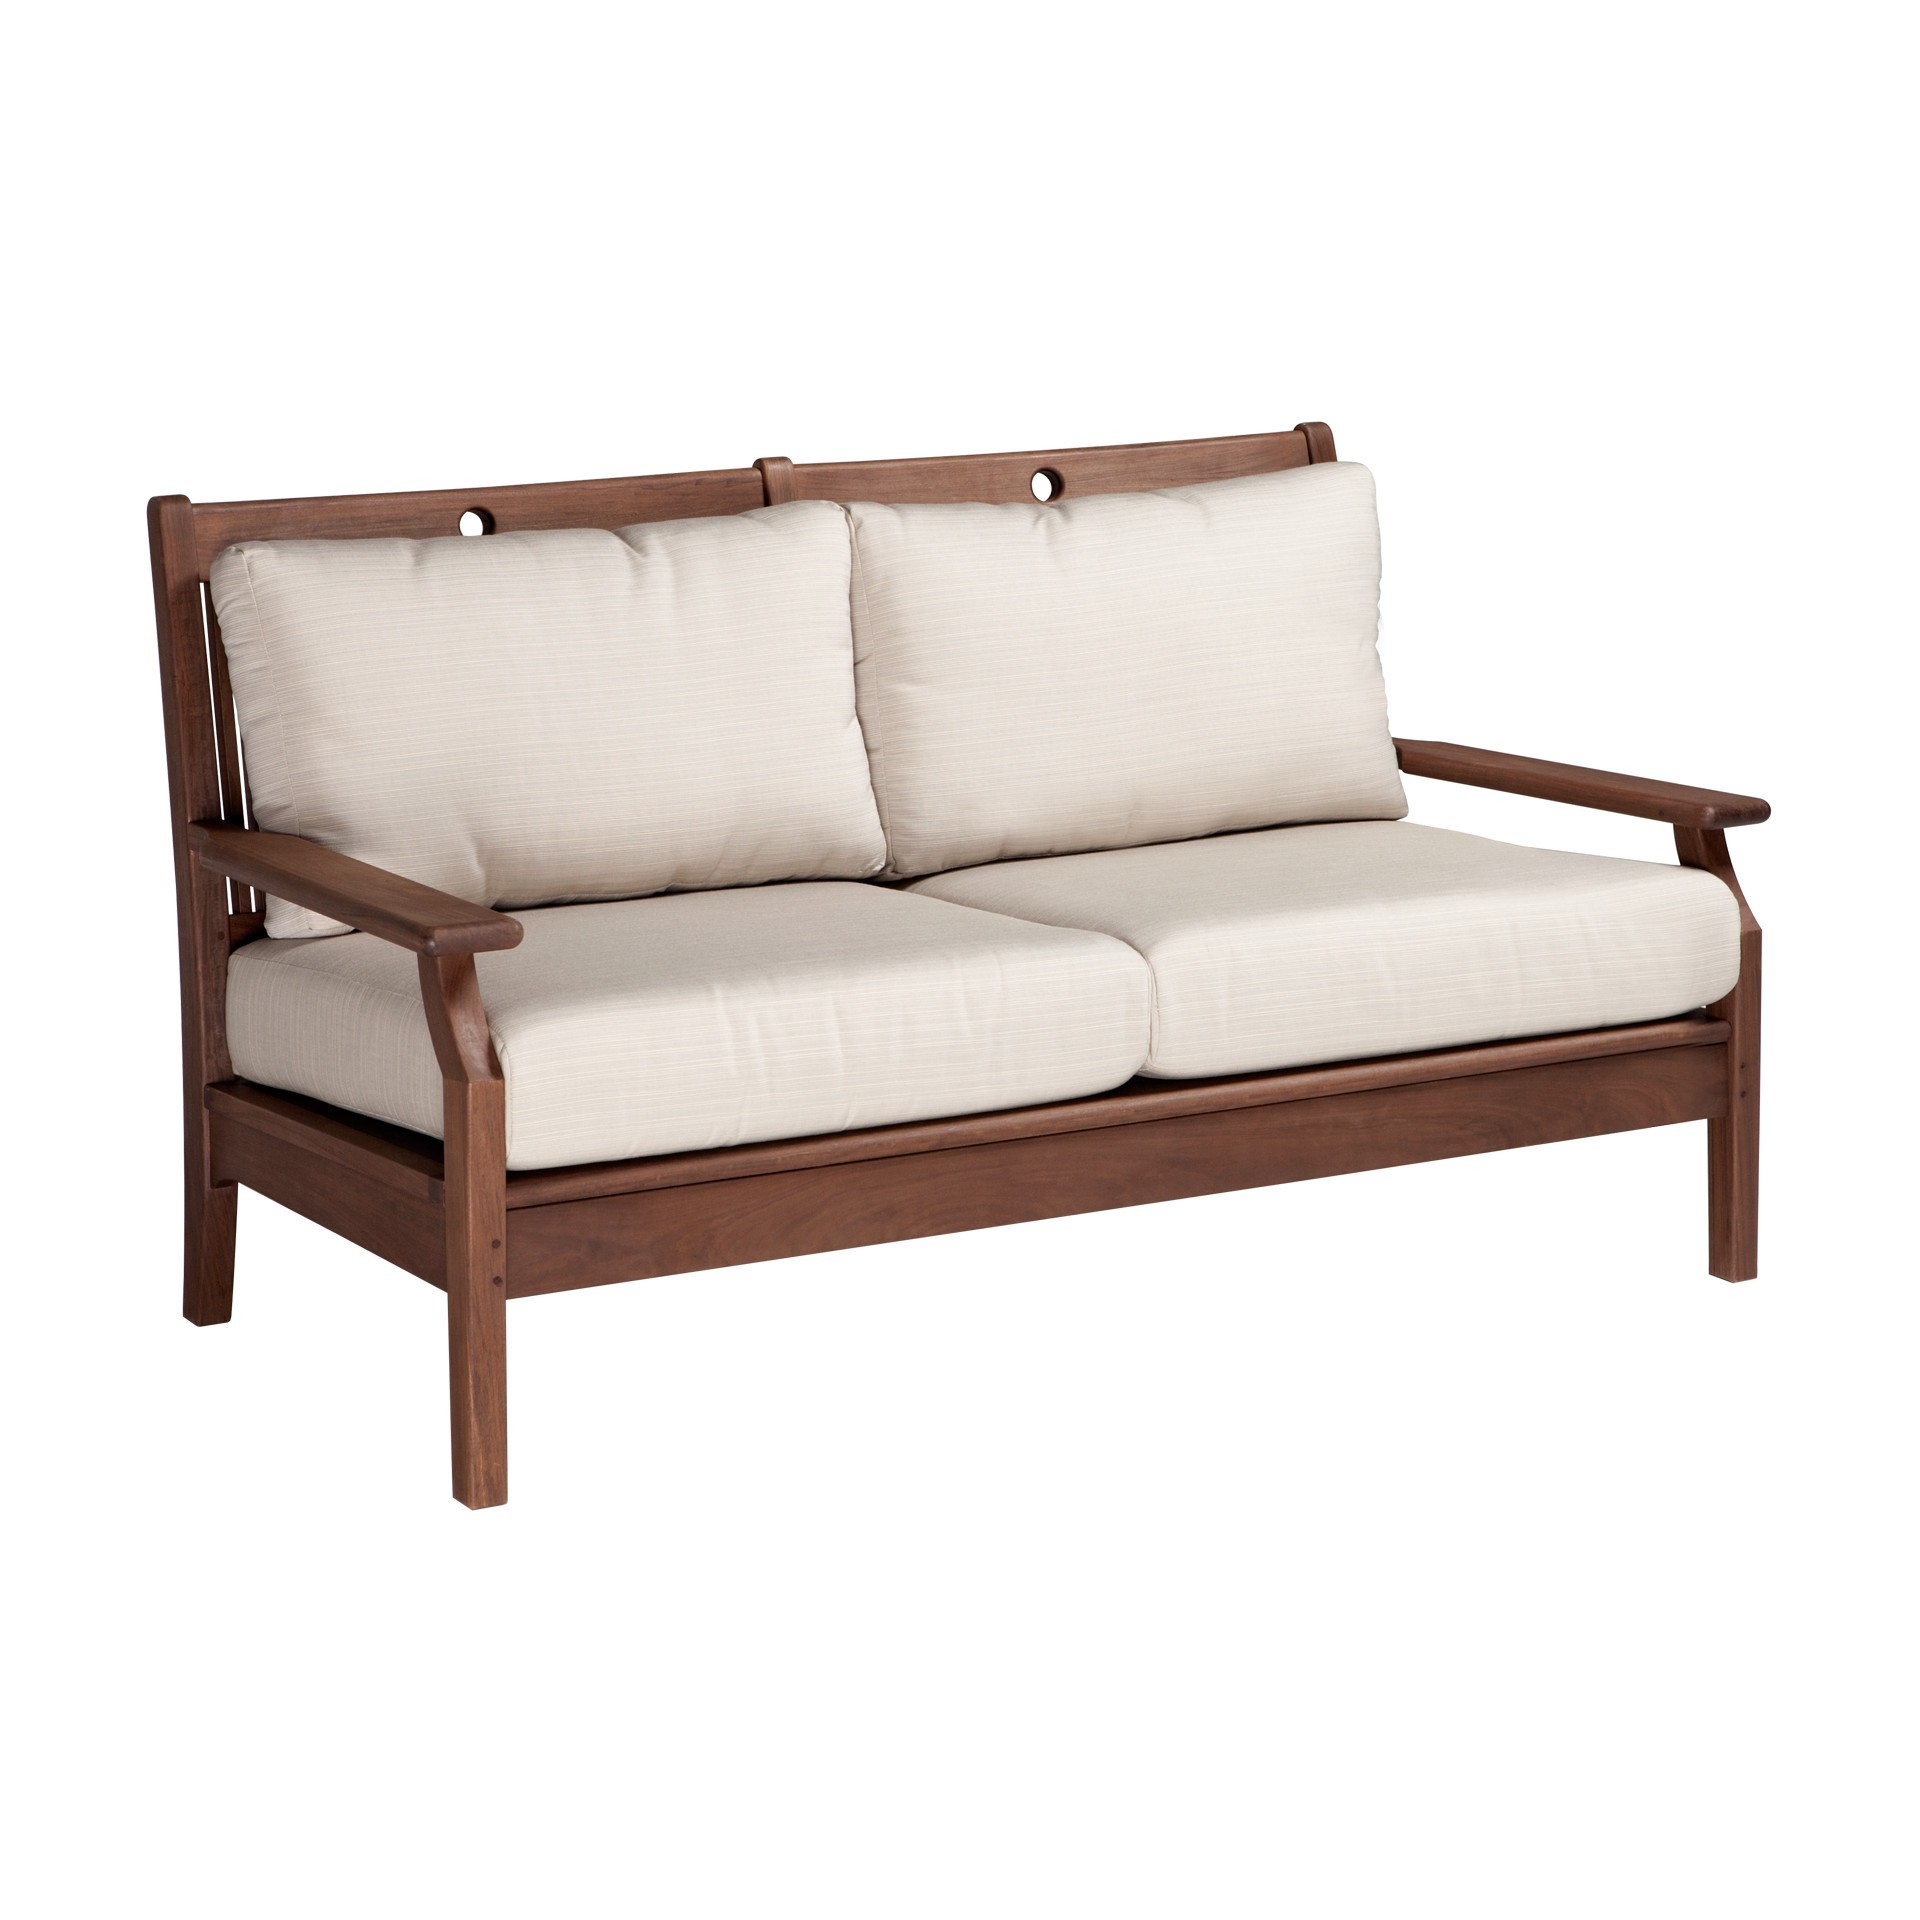 Opal loveseat from hausers patio luxury outdoor living by hausers patio luxury outdoor living by hausers patio